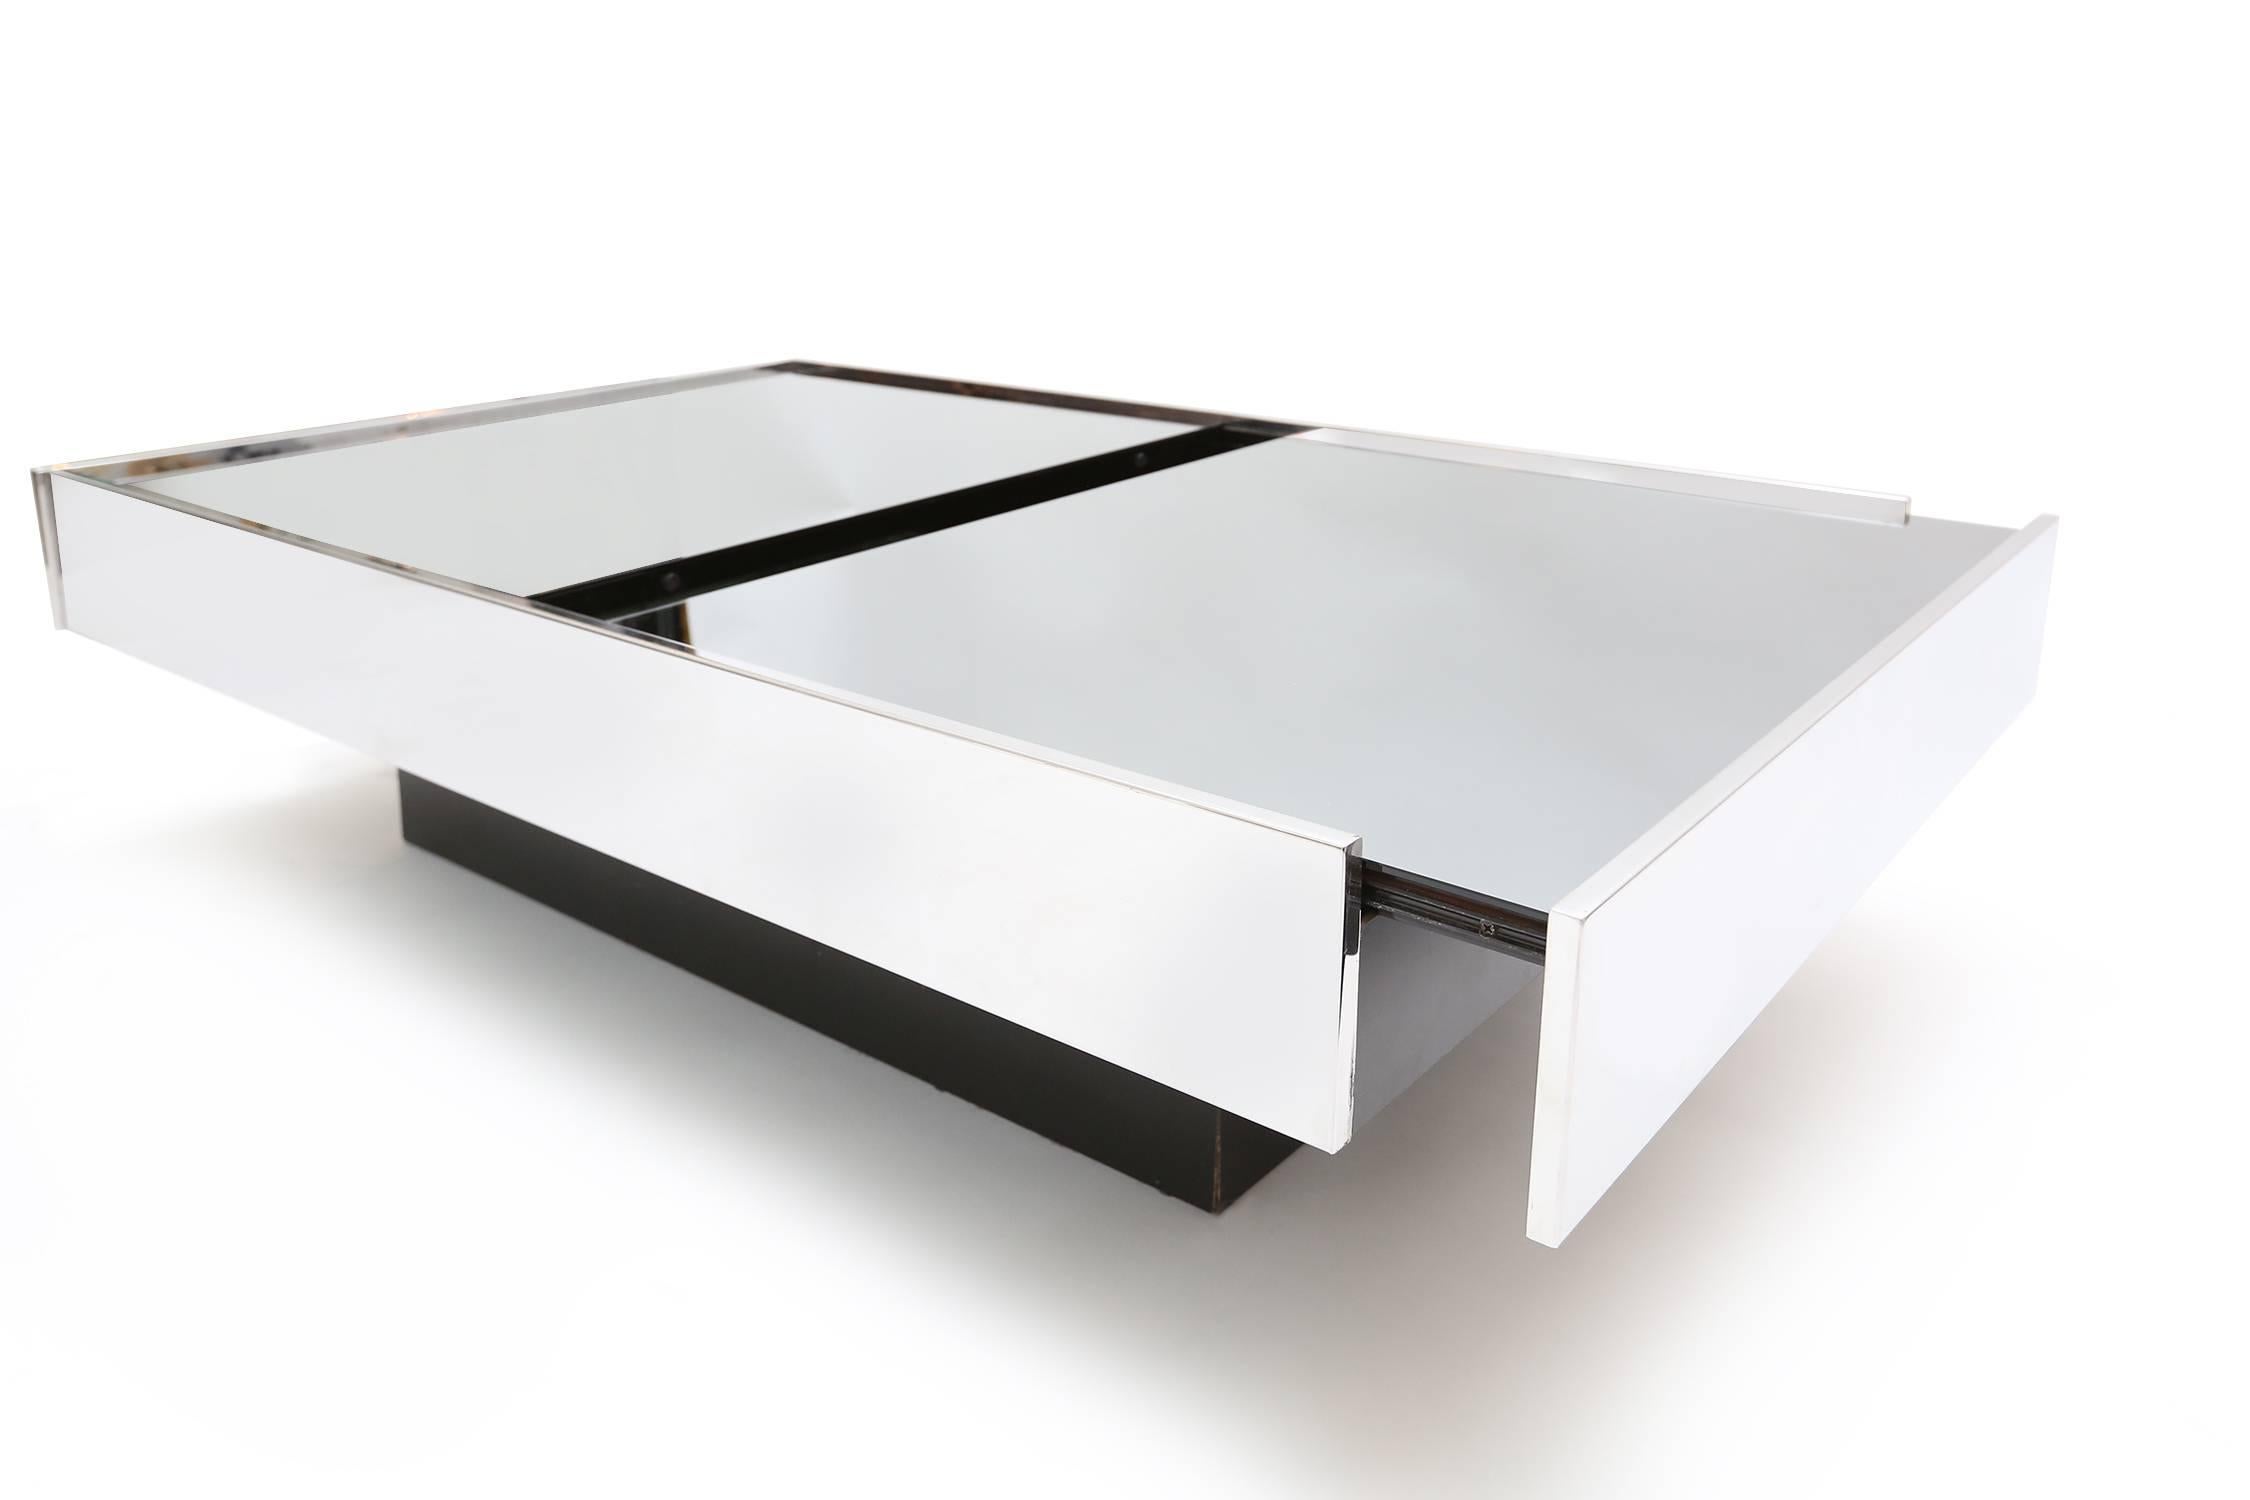 Willy Rizzo for Cidue.
Italy 1970s.
Chromed metal silver mirrored glass.
Extended:
194cm x 80cm x 39cm.